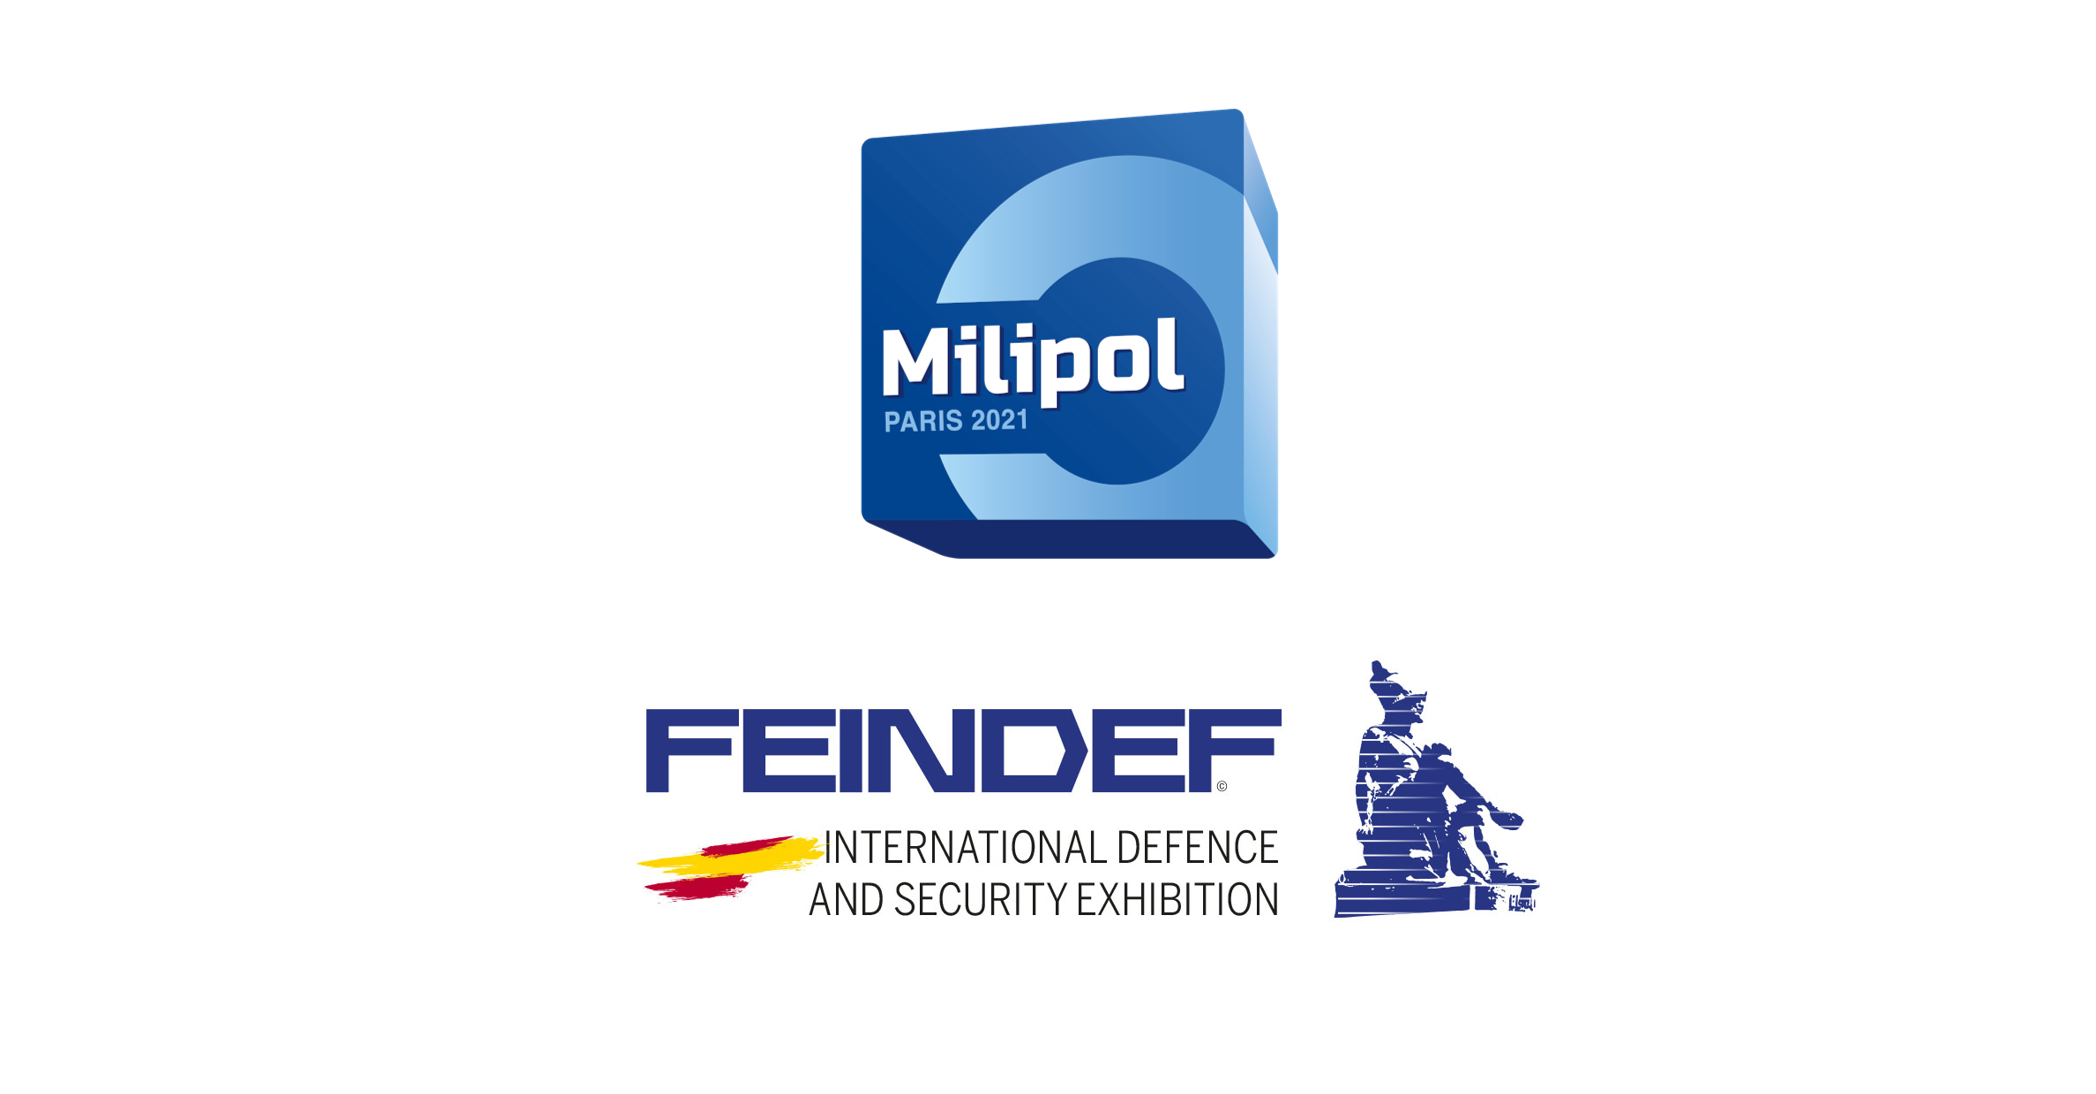 The aunav.NEO robot’s first presentation in Europe at MILIPOL and FEINDEF